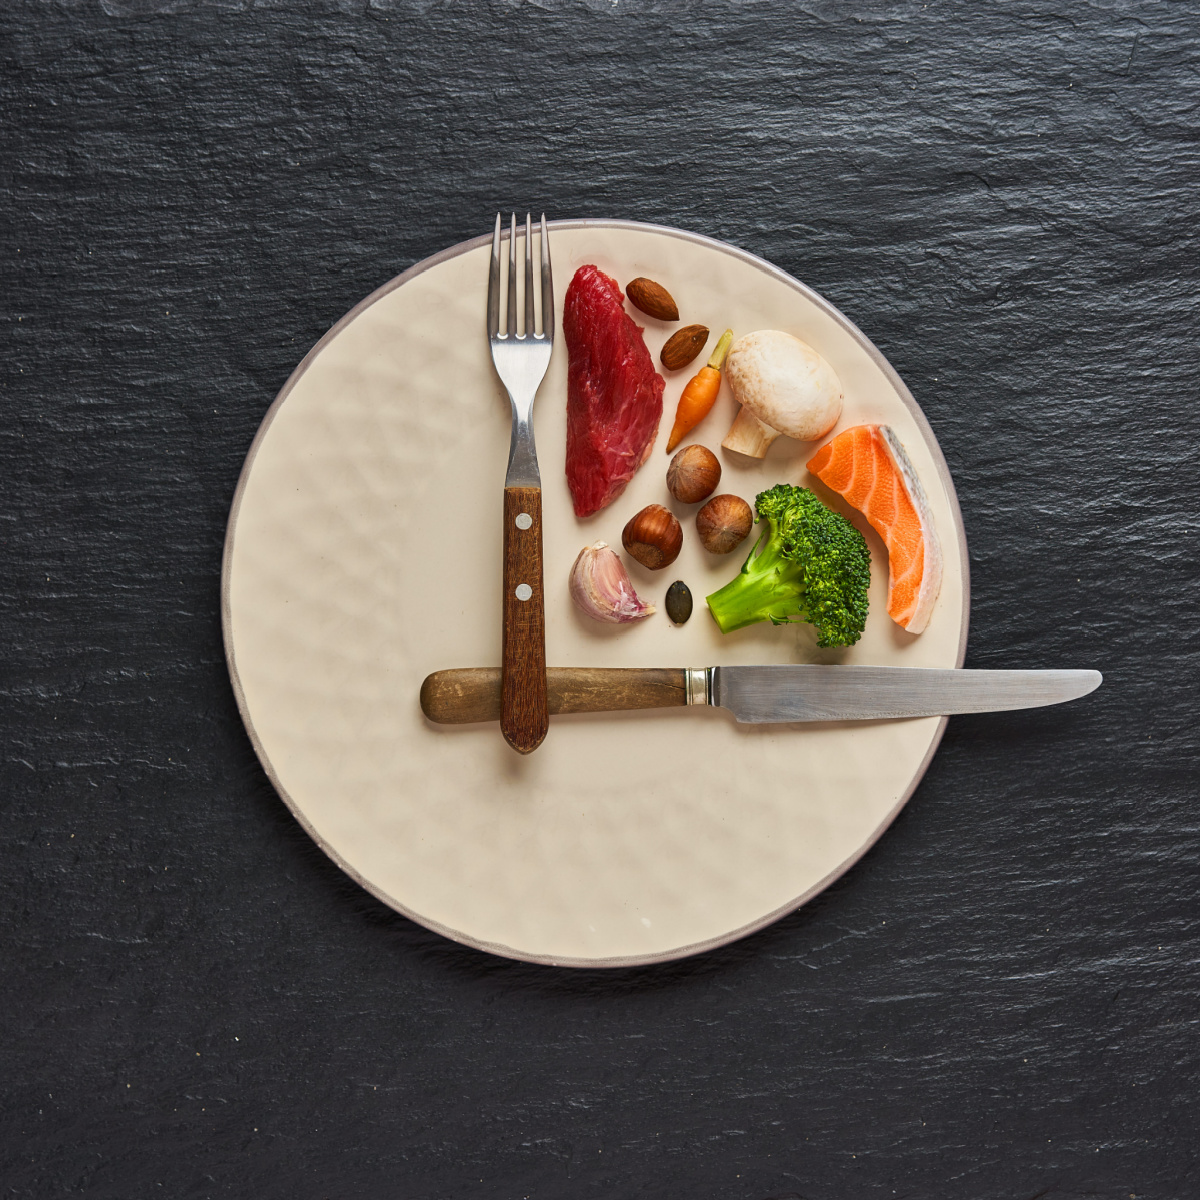 A plate designed to look like a clock.